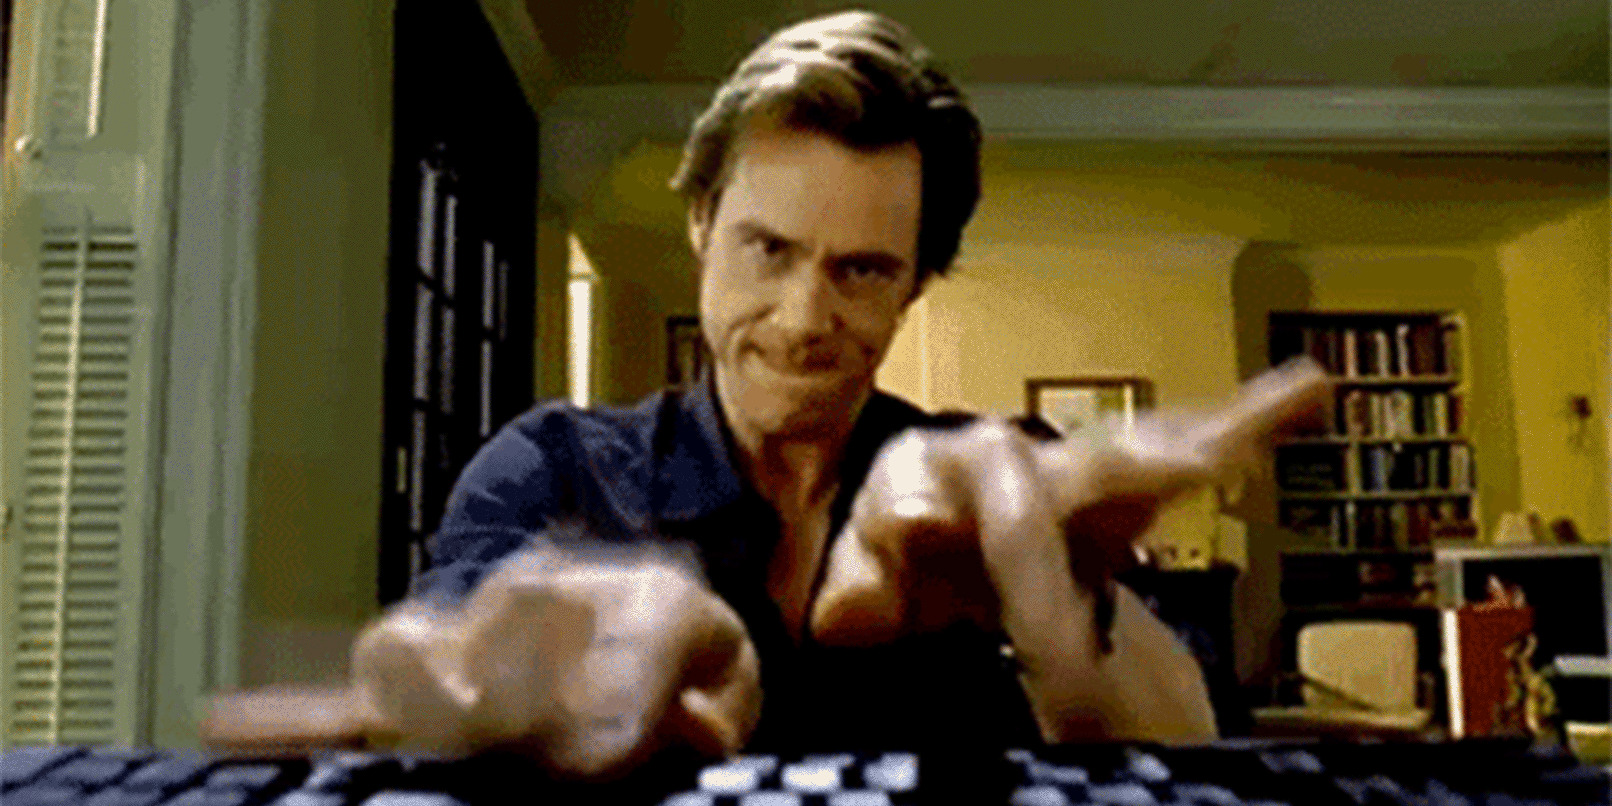 Typing keyboard hands GIF.